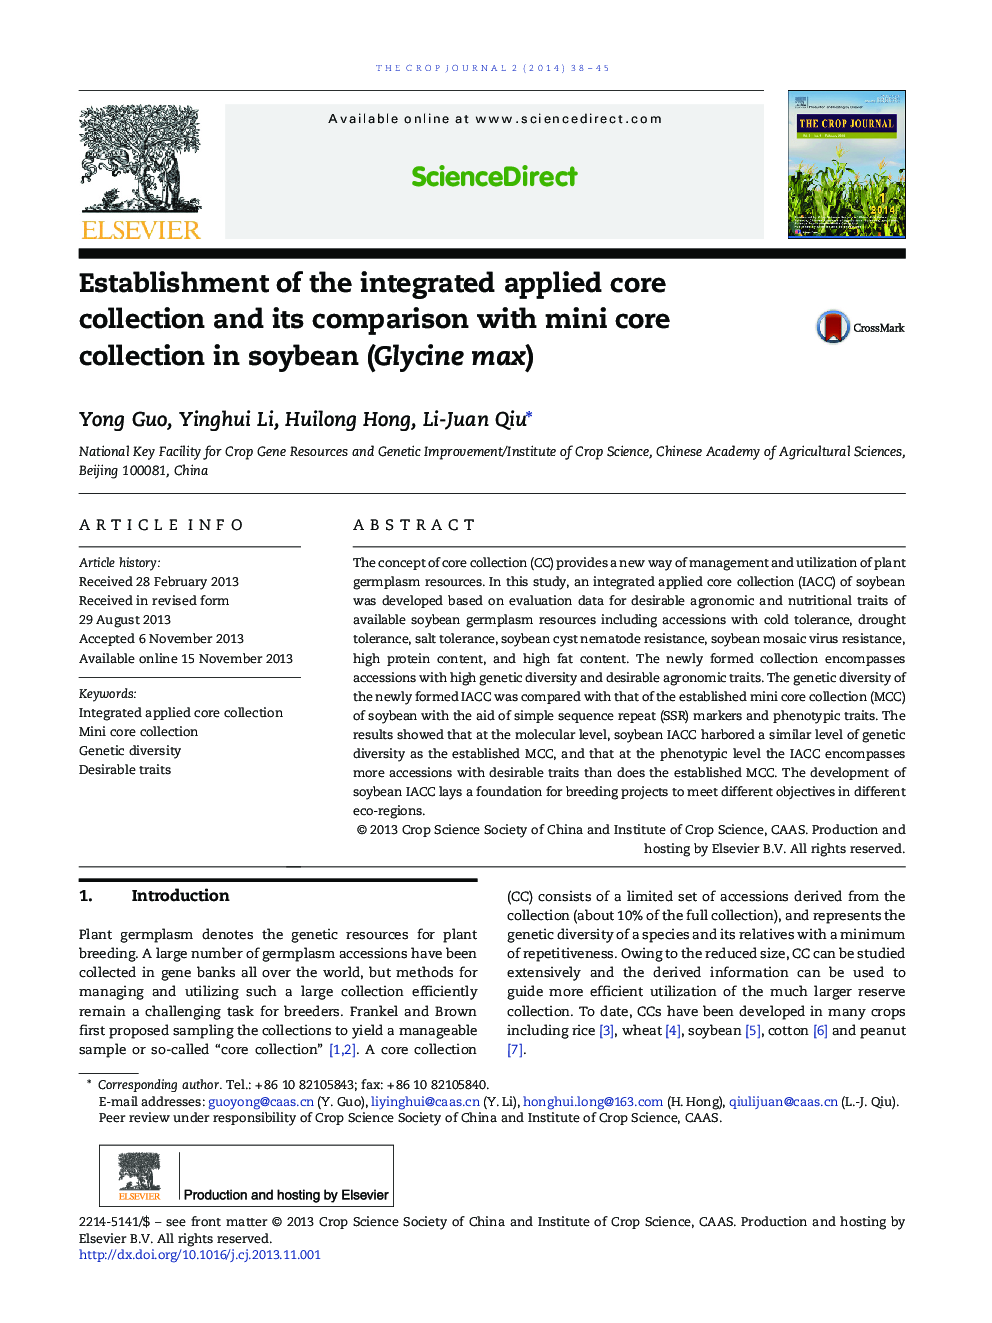 Establishment of the integrated applied core collection and its comparison with mini core collection in soybean (Glycine max) 